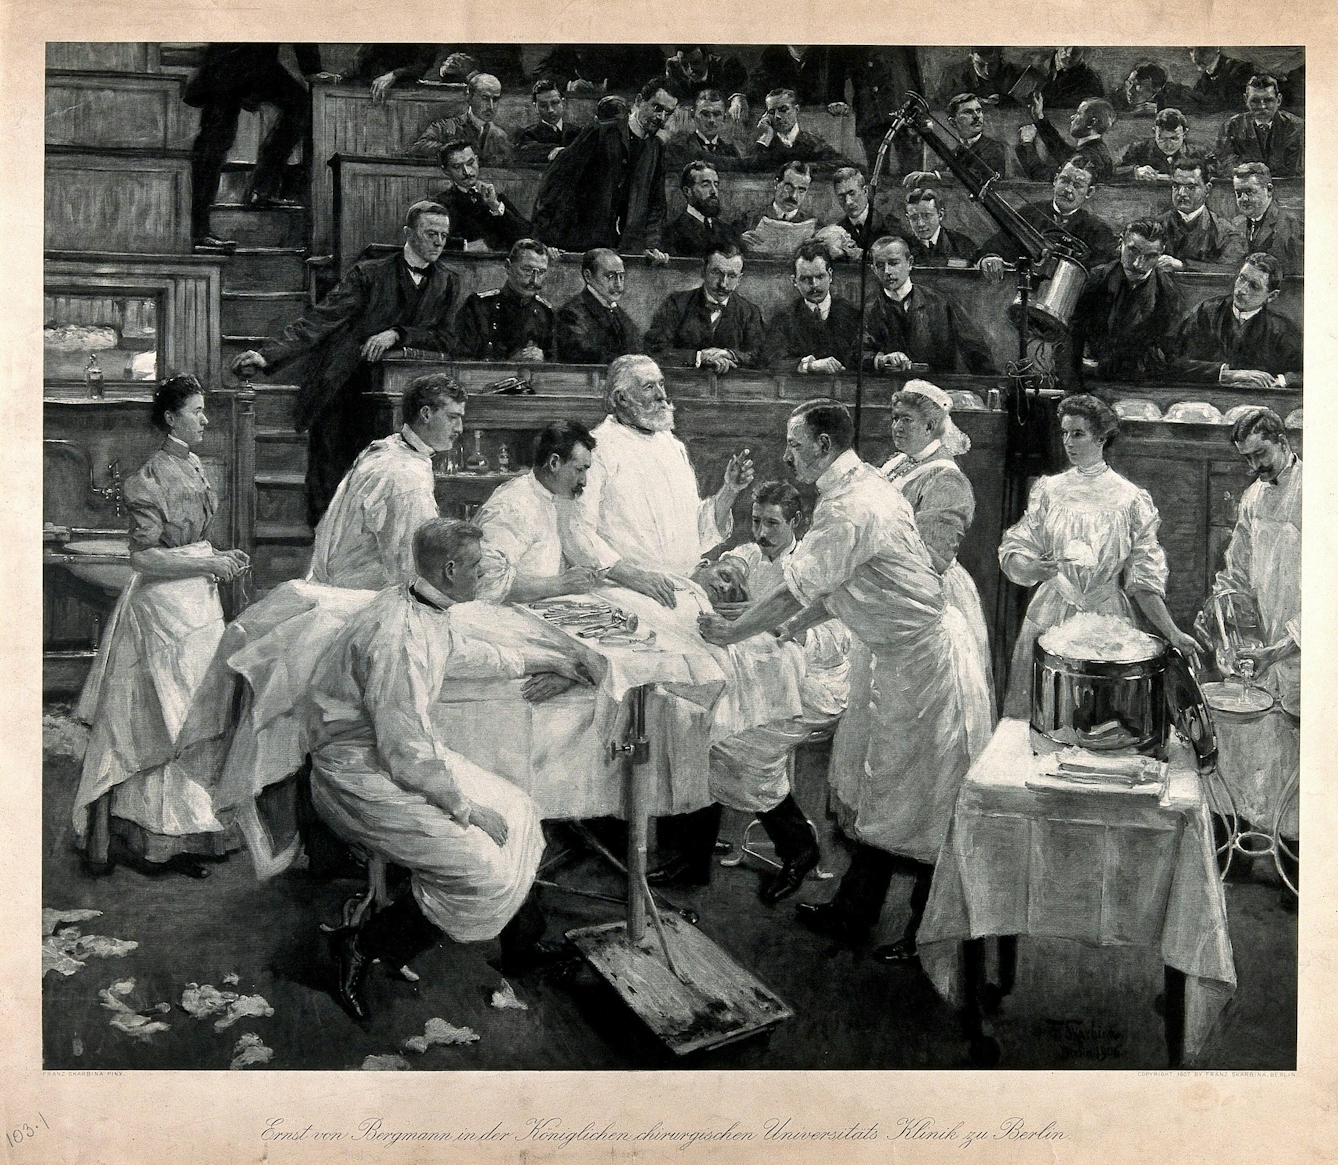 Photogravure of surgeon Ernst von Bergmann operating in an amphitheatre. The artist shows the instruments on a tray ready for use. On the right-hand side a Schimmelbusch drum takes a prominent place. Everybody involved in the operation wears white surgical gowns, which creates a contrast to the dark tones of the background. There are no surgical gloves shown, nor are masks or hats worn in this image. The scene is set in a semi-public operating theatre. The operation takes place in front of an audience of interested colleagues in street clothes. 